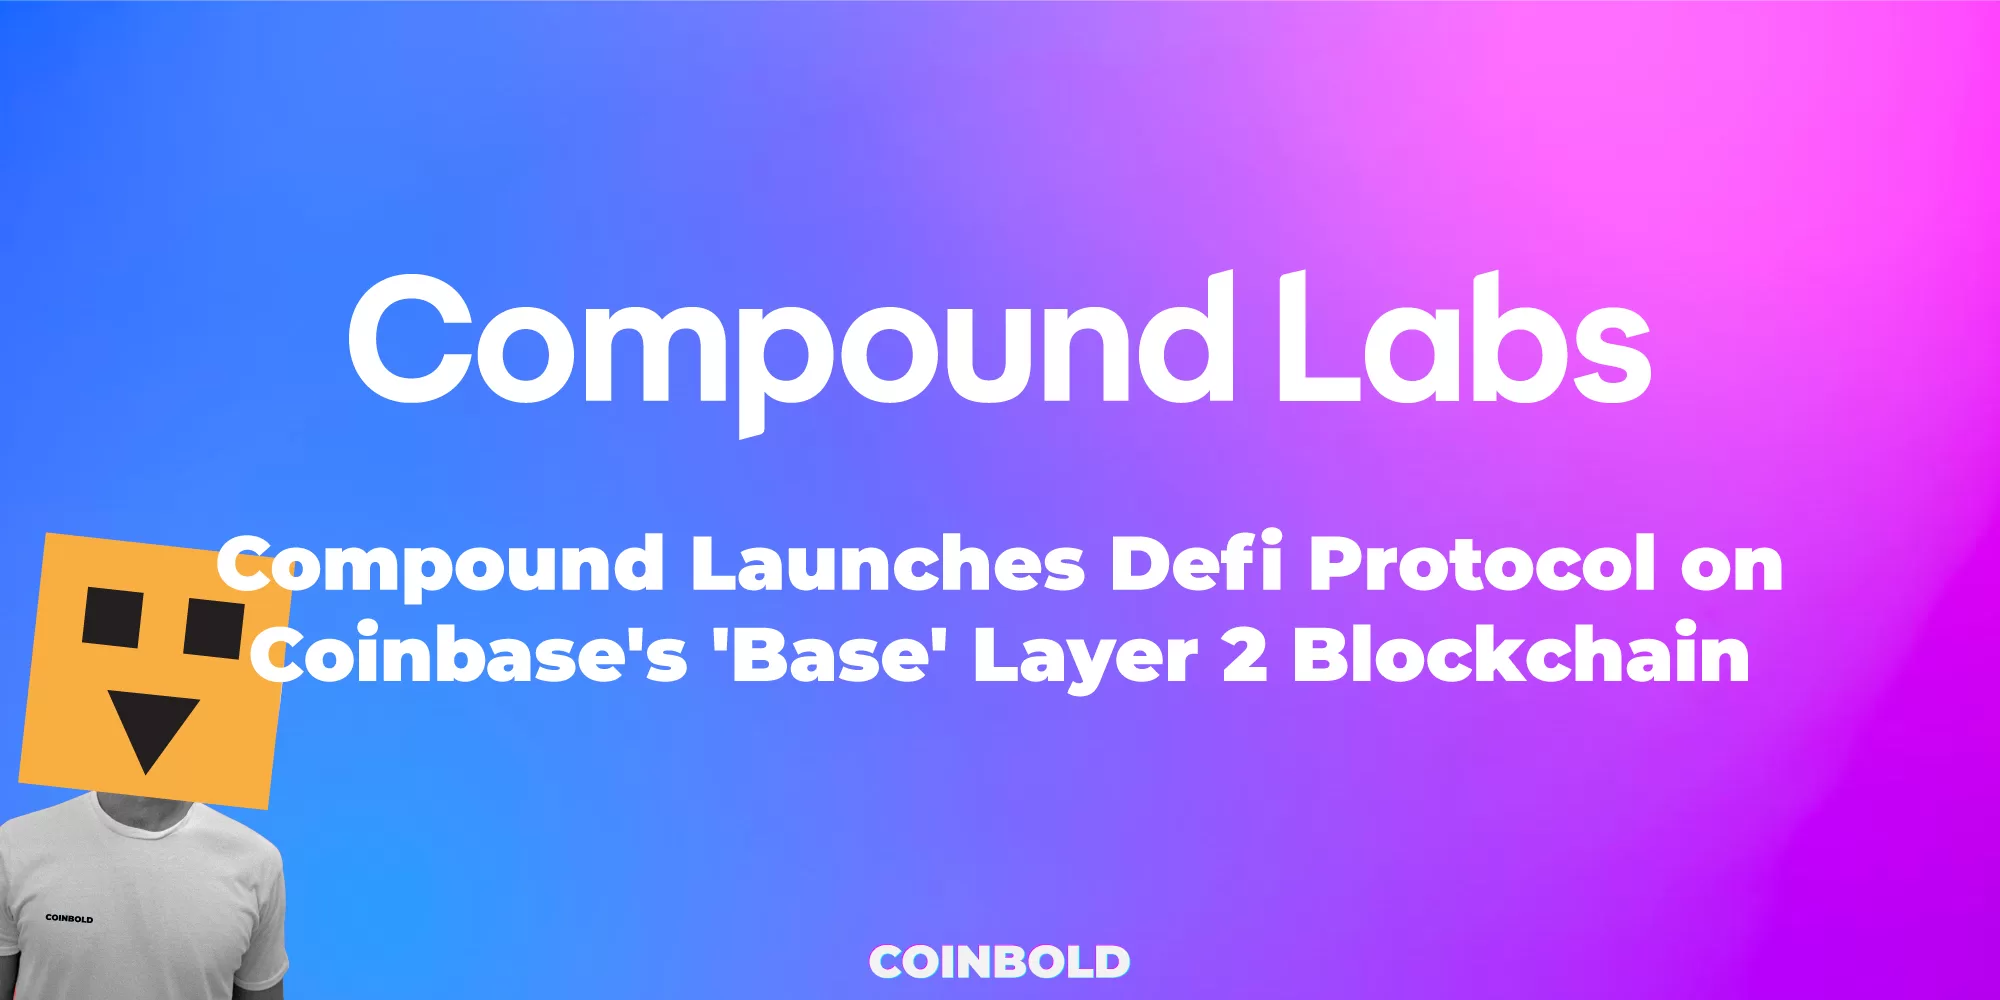 Compound Launches Defi Protocol on Coinbase's 'Base' Layer 2 Blockchain